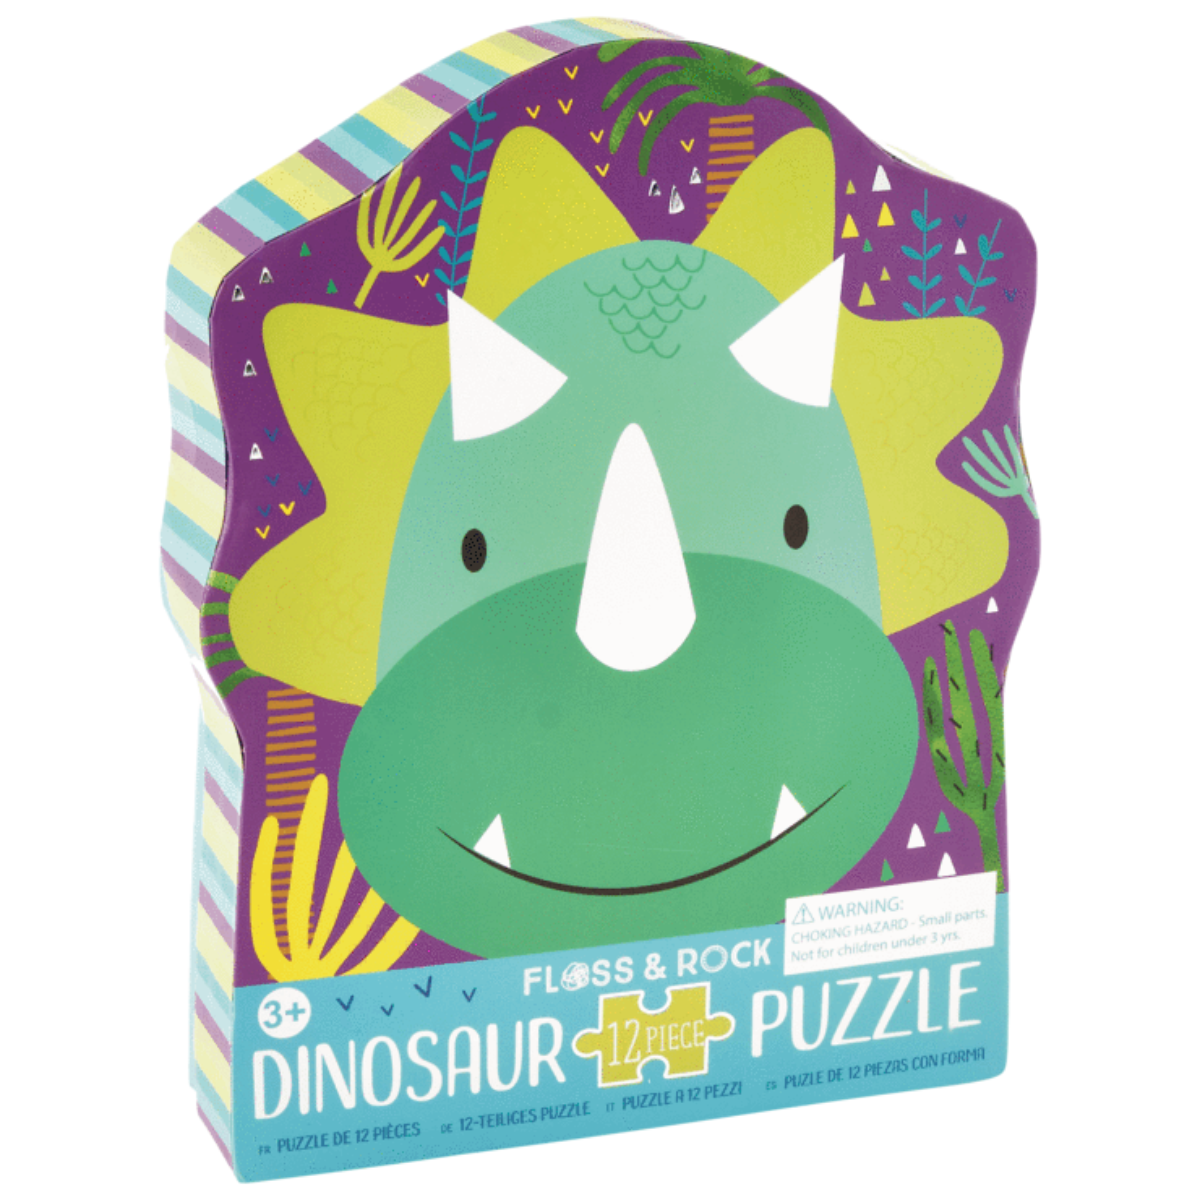 Floss & Rock – Puzzle dino